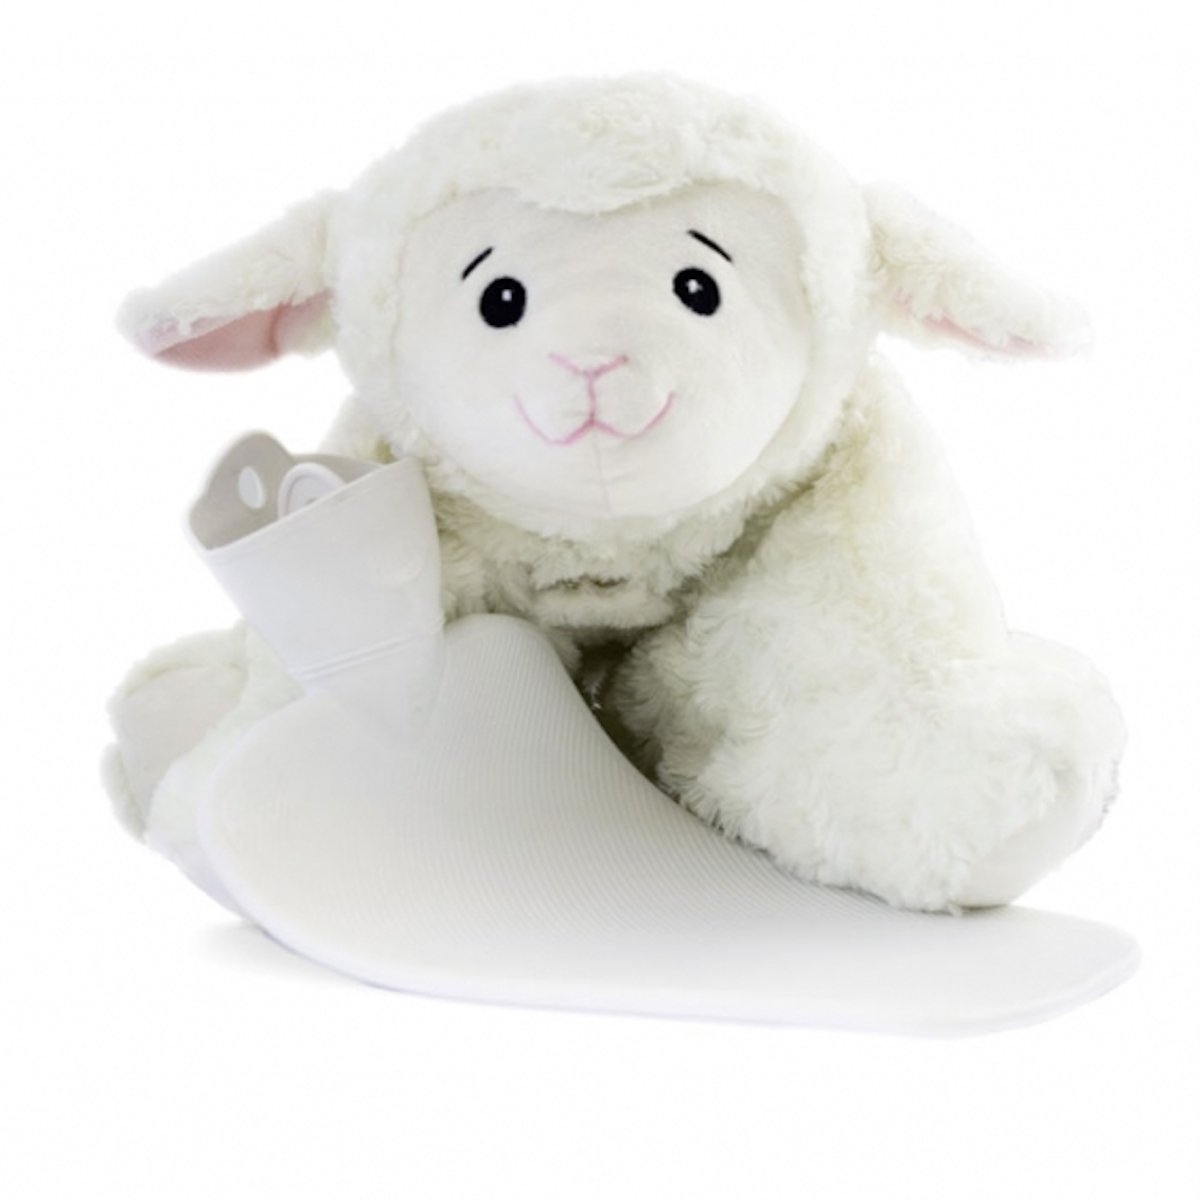 Hot Water Bottle Classic - Cuddly Cushion 3 in 1 Sheep